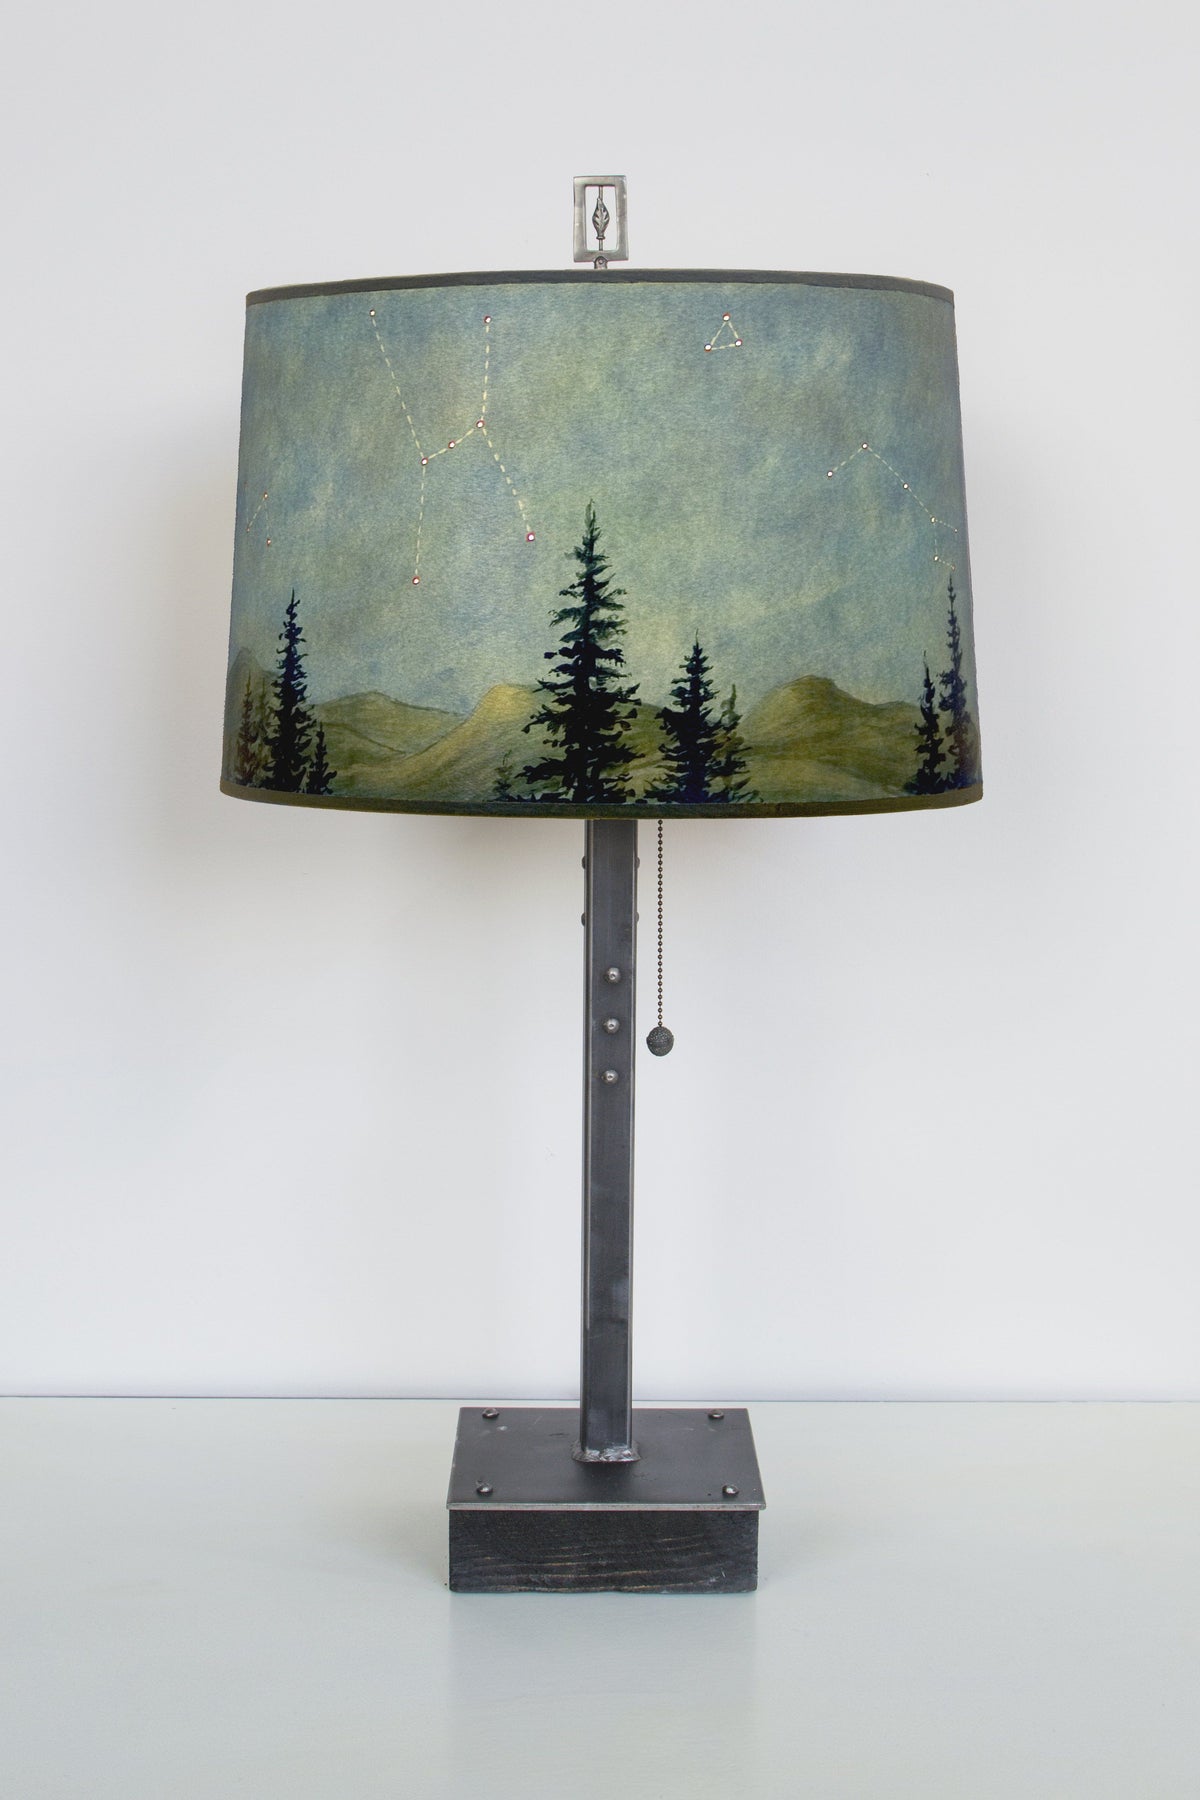 Steel Table Lamp on Wood with Large Drum Shade in Midnight Sky